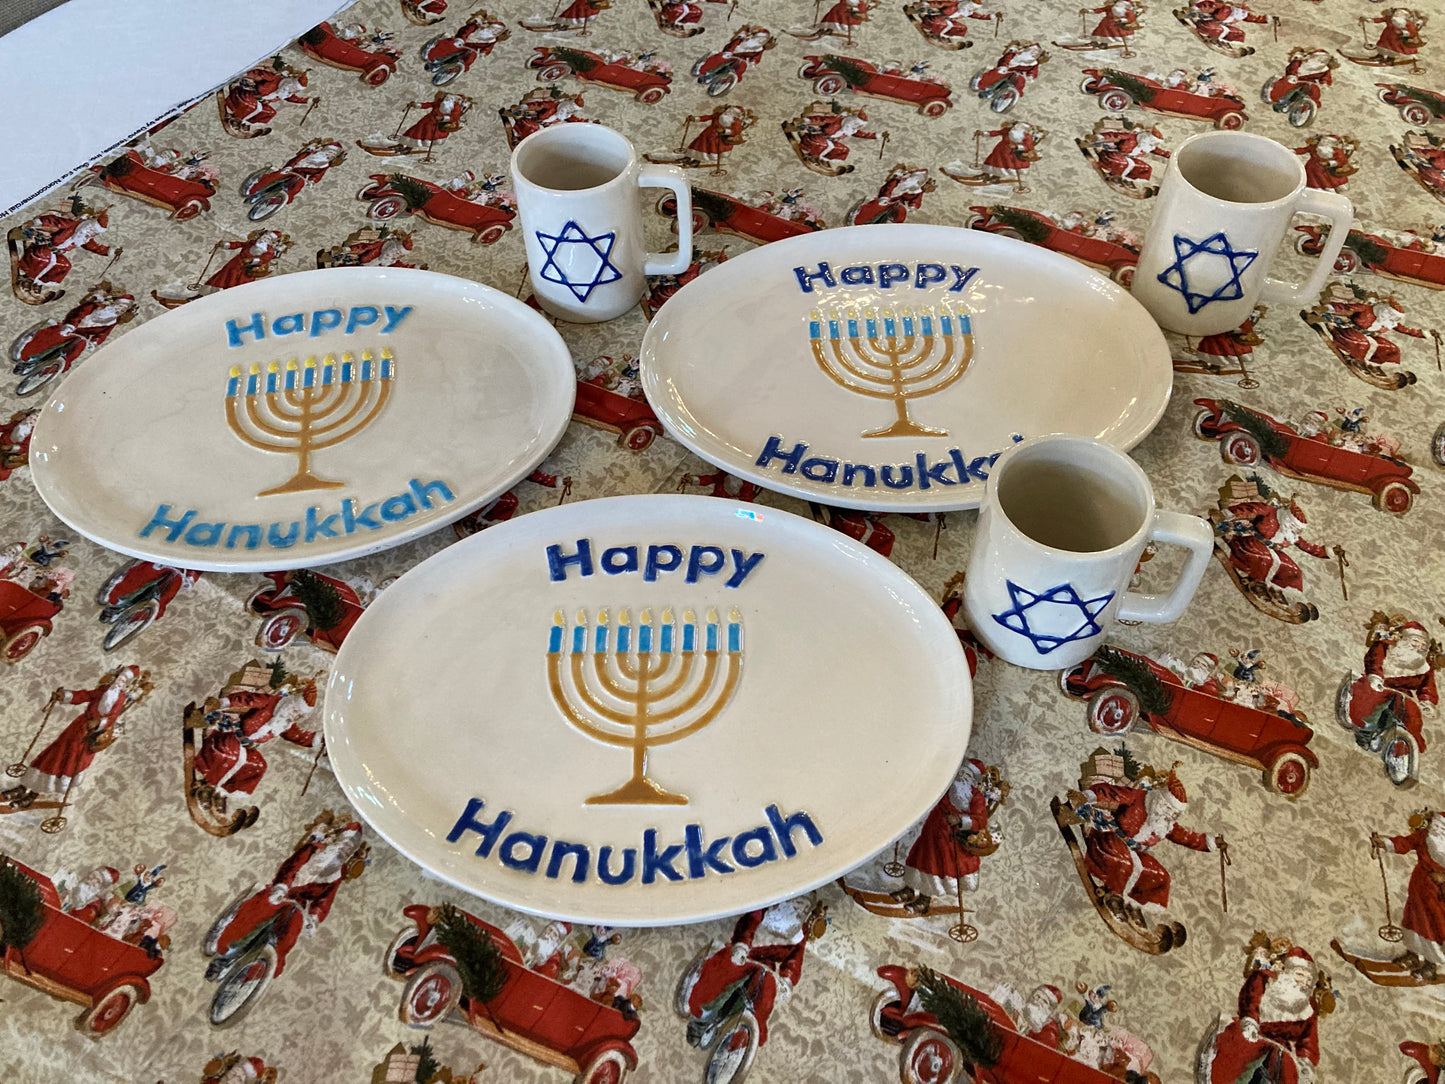 Hanukkah Trays and Cups made by Dee Dee, AC & Alta